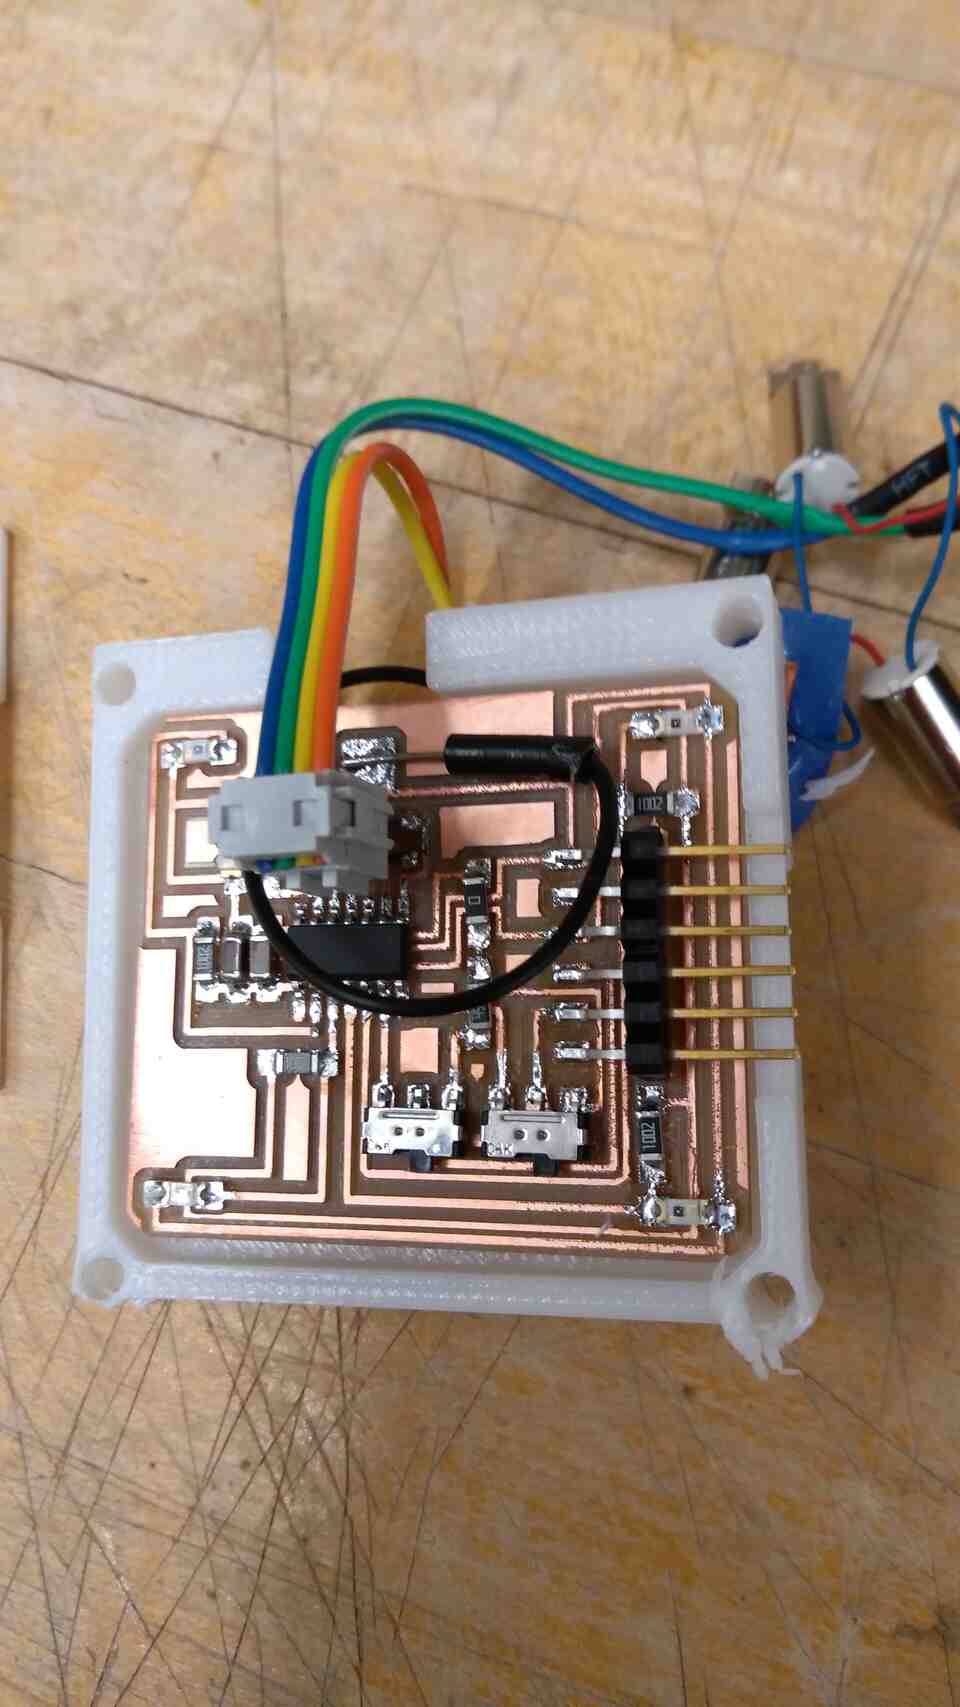 PCB inserted